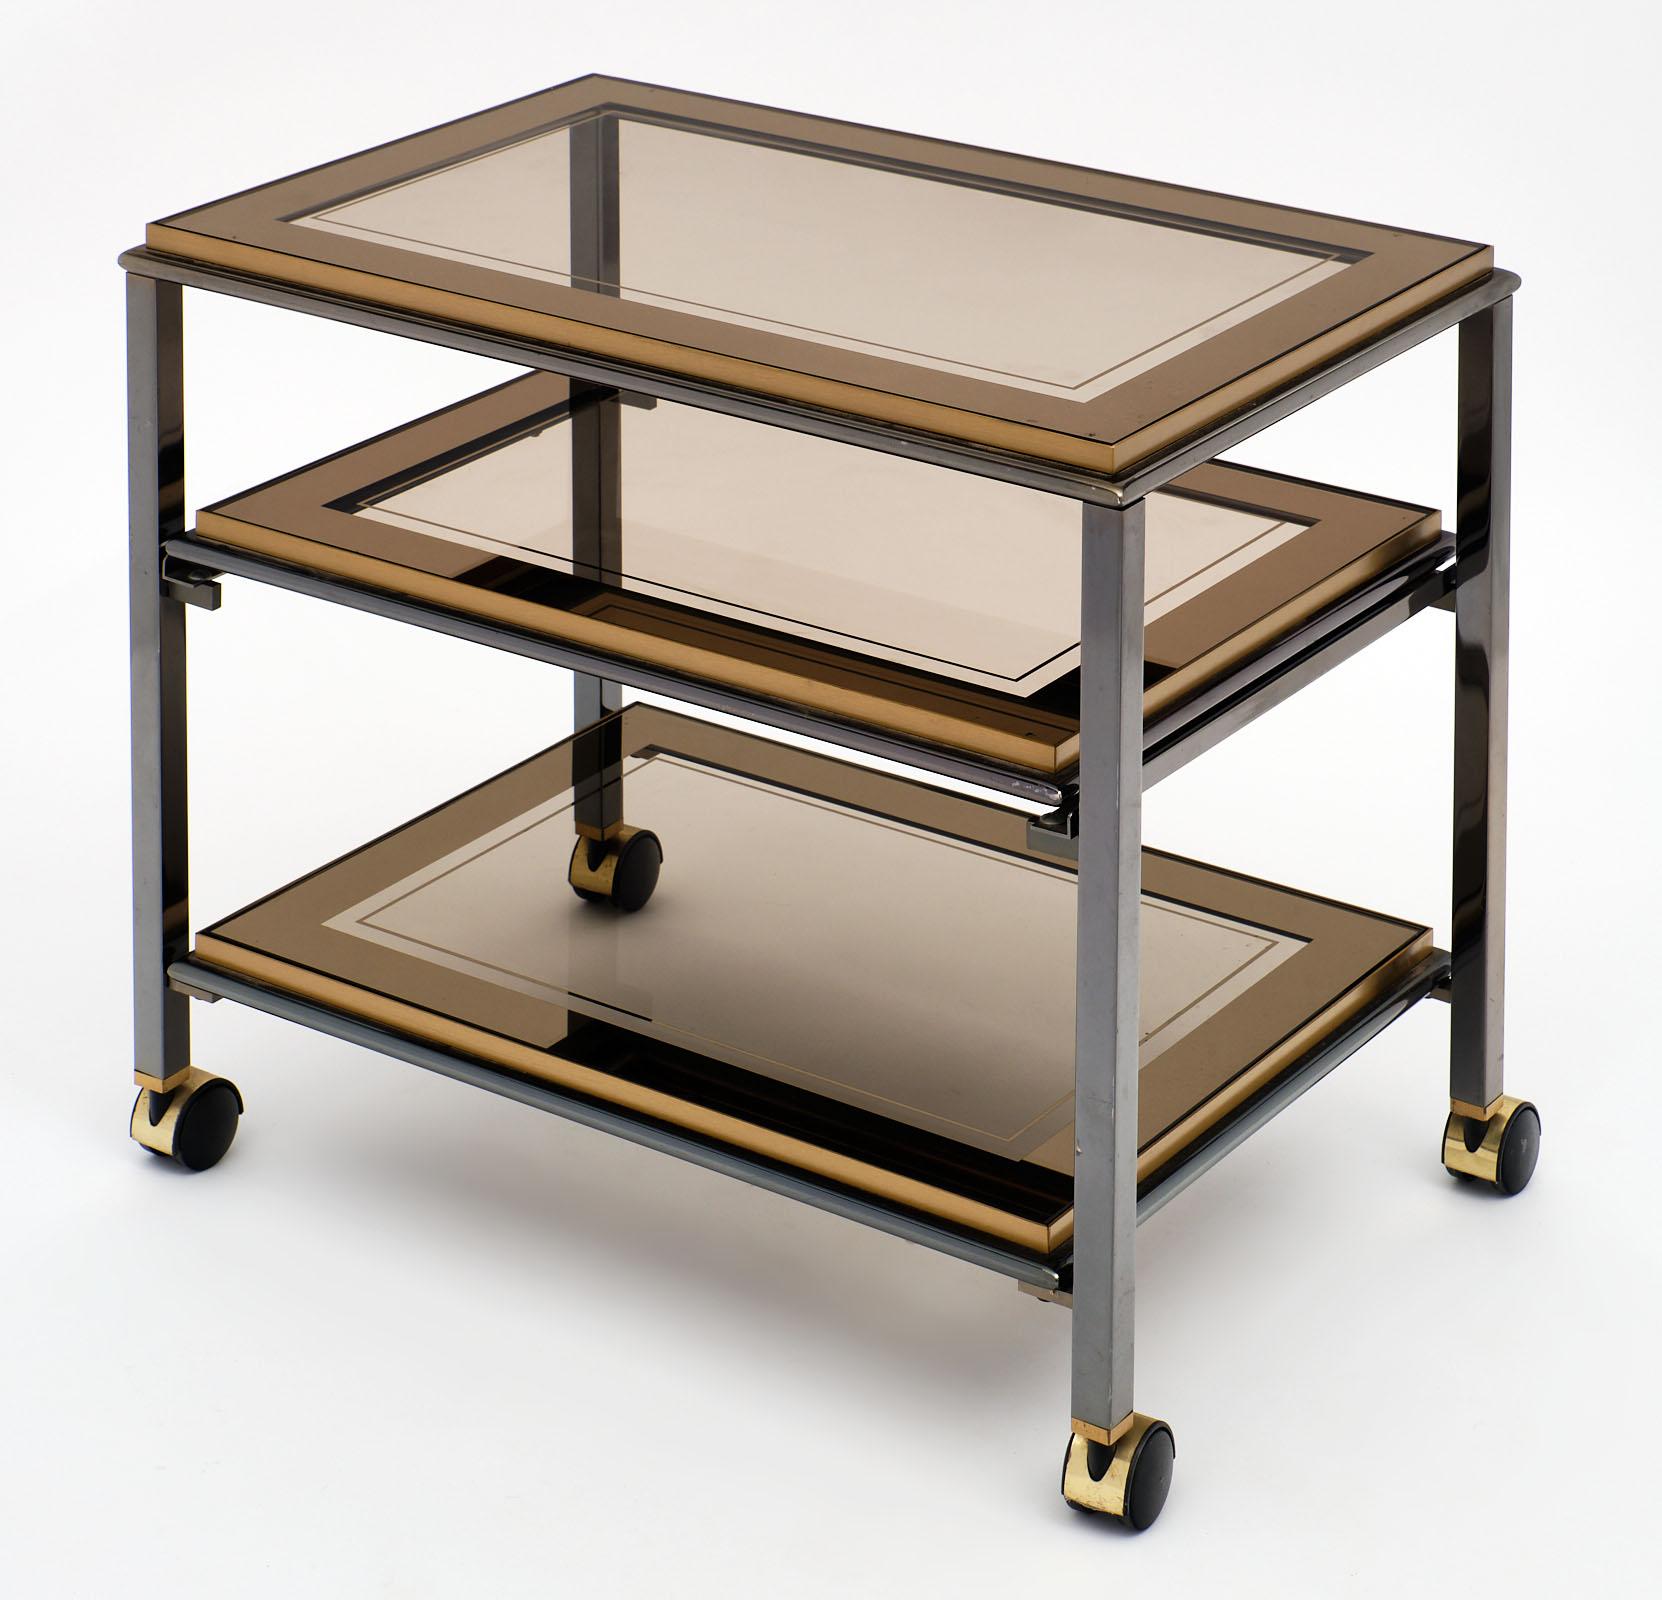 Modernist French side table on casters made of steel and brass. This piece features three shelves and the middle shelf slides forward for functionality. The shelves are smoked glass with the original mirrored banding on the glass.